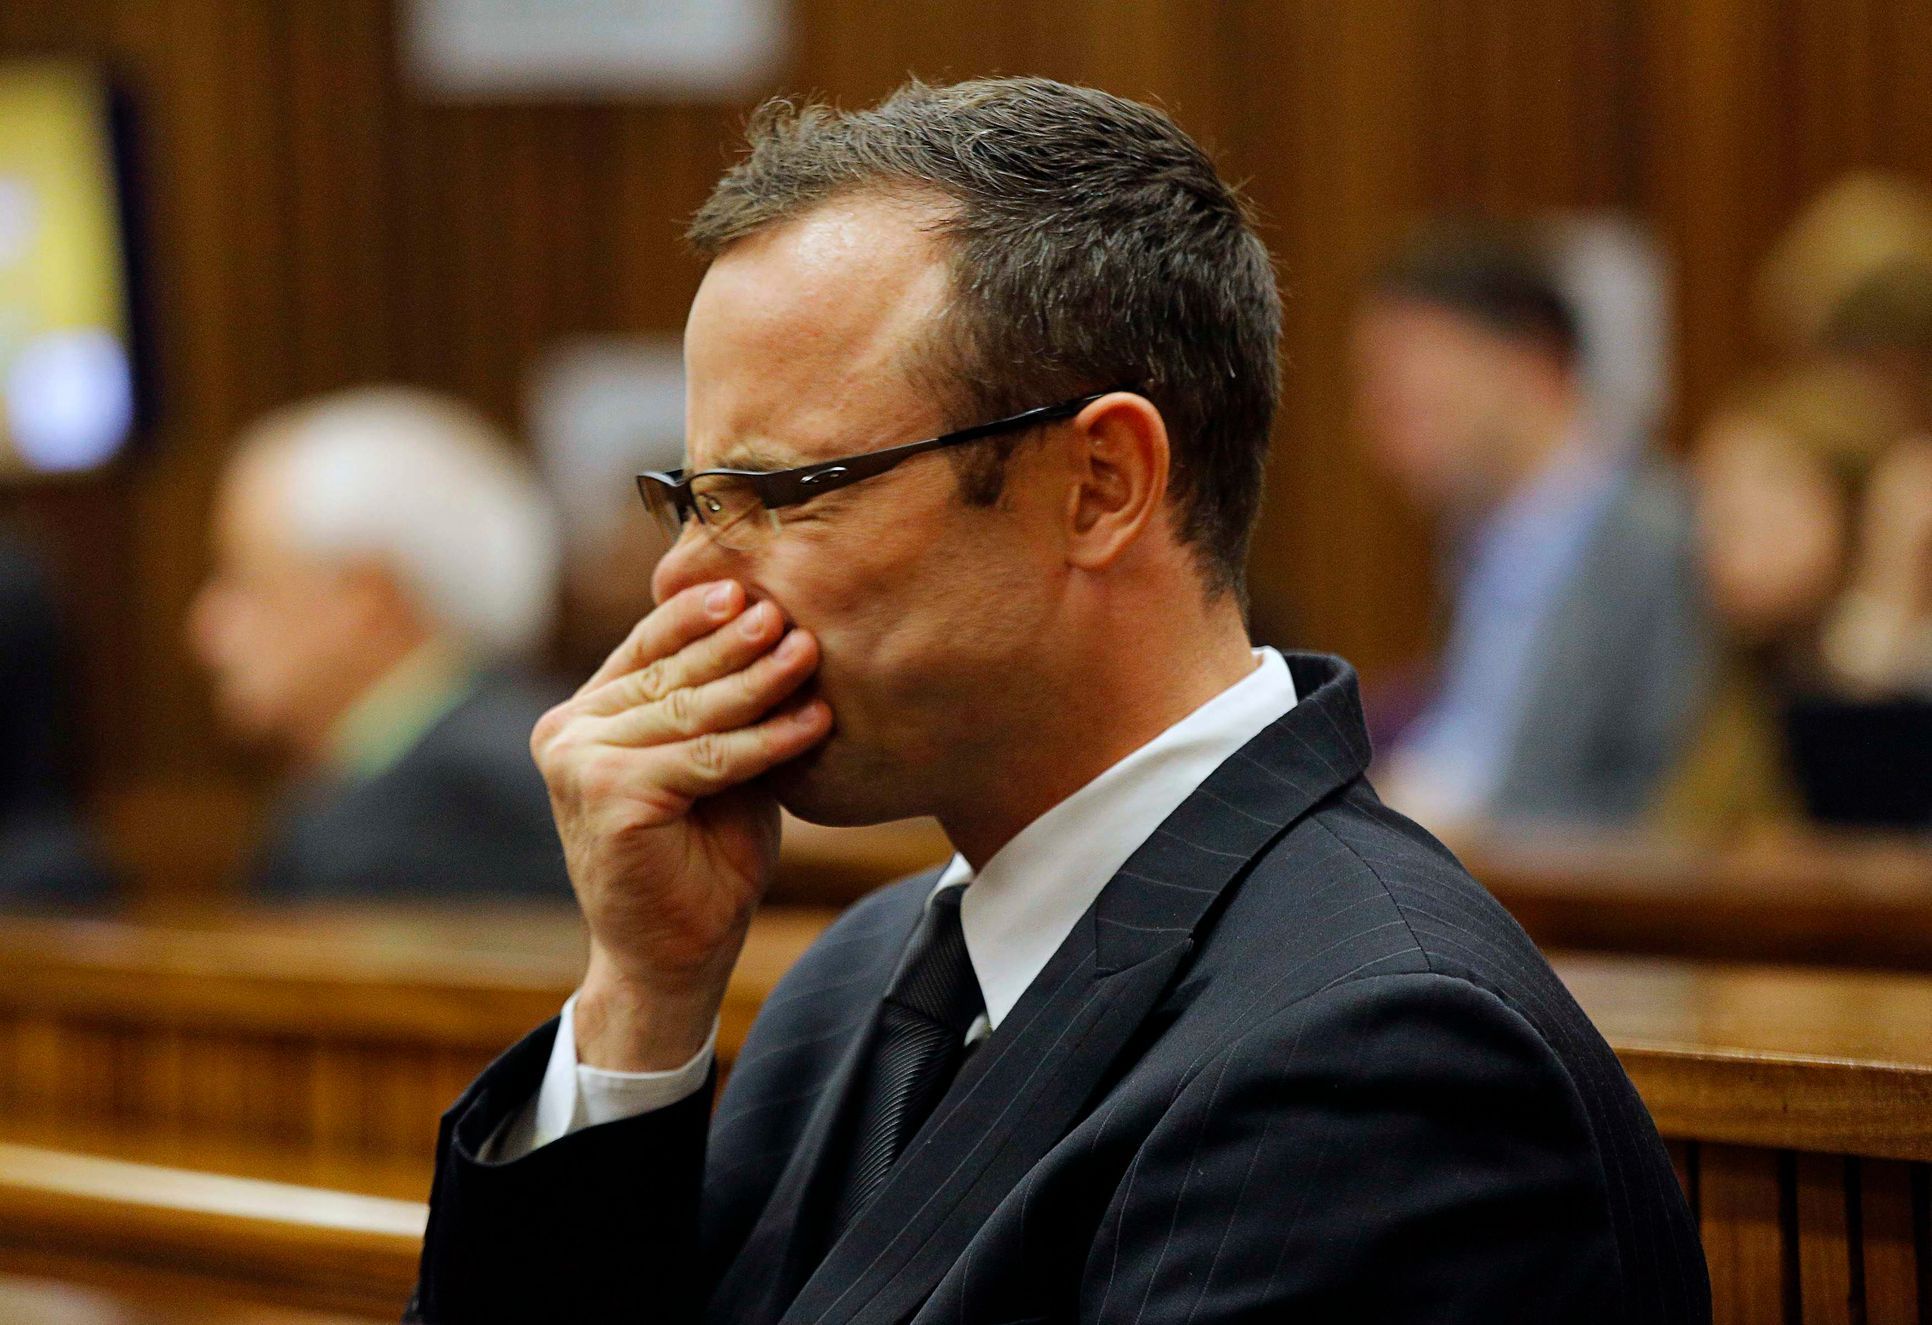 Olympic and Paralympic track star Oscar Pistorius sits in the dock at the North Gauteng High Court in Pretoria